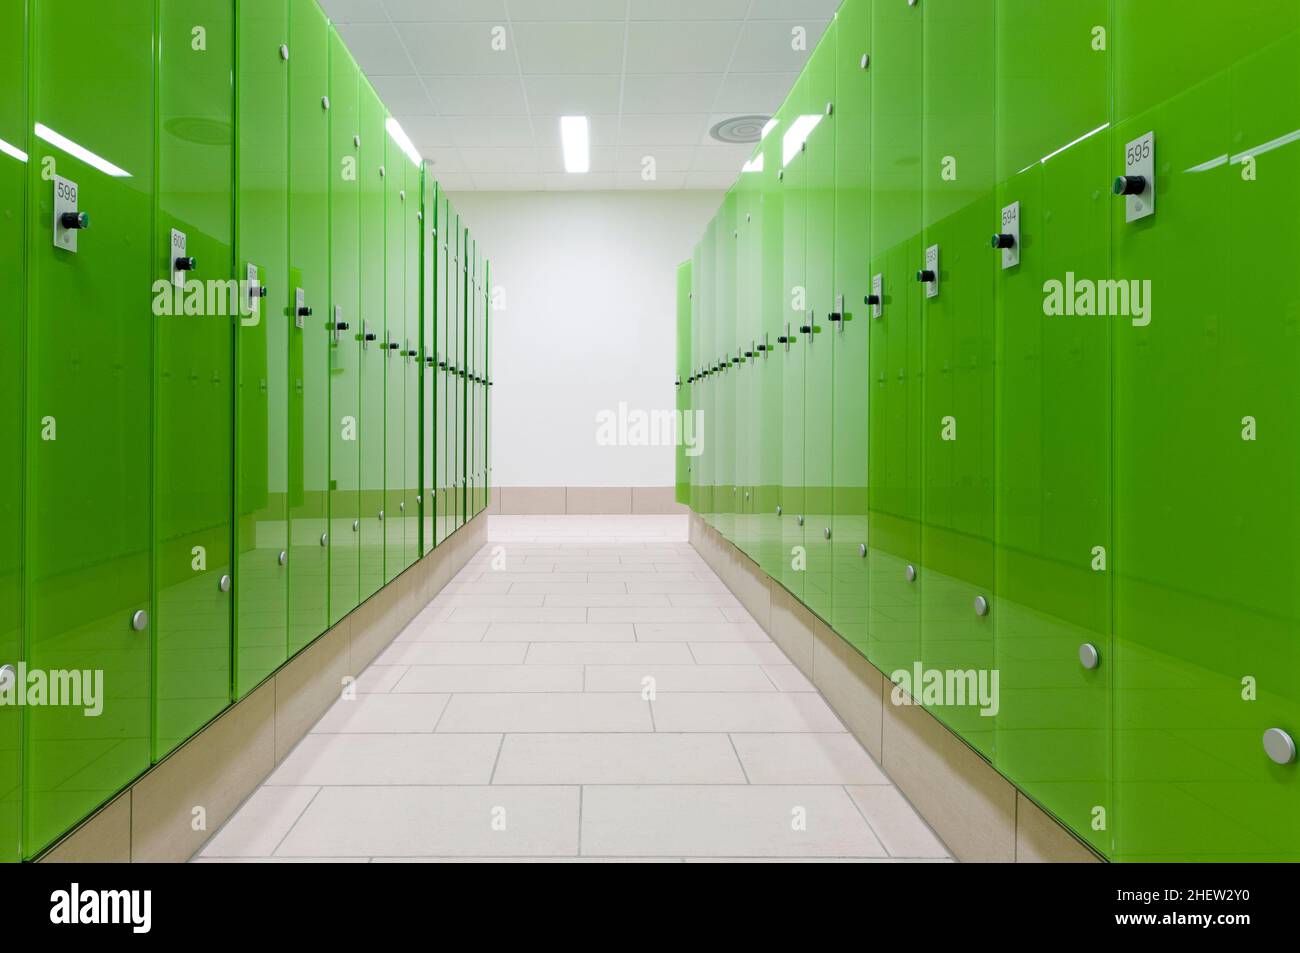 Perspective of green safe deposit box in a swimming bath or pool Stock Photo